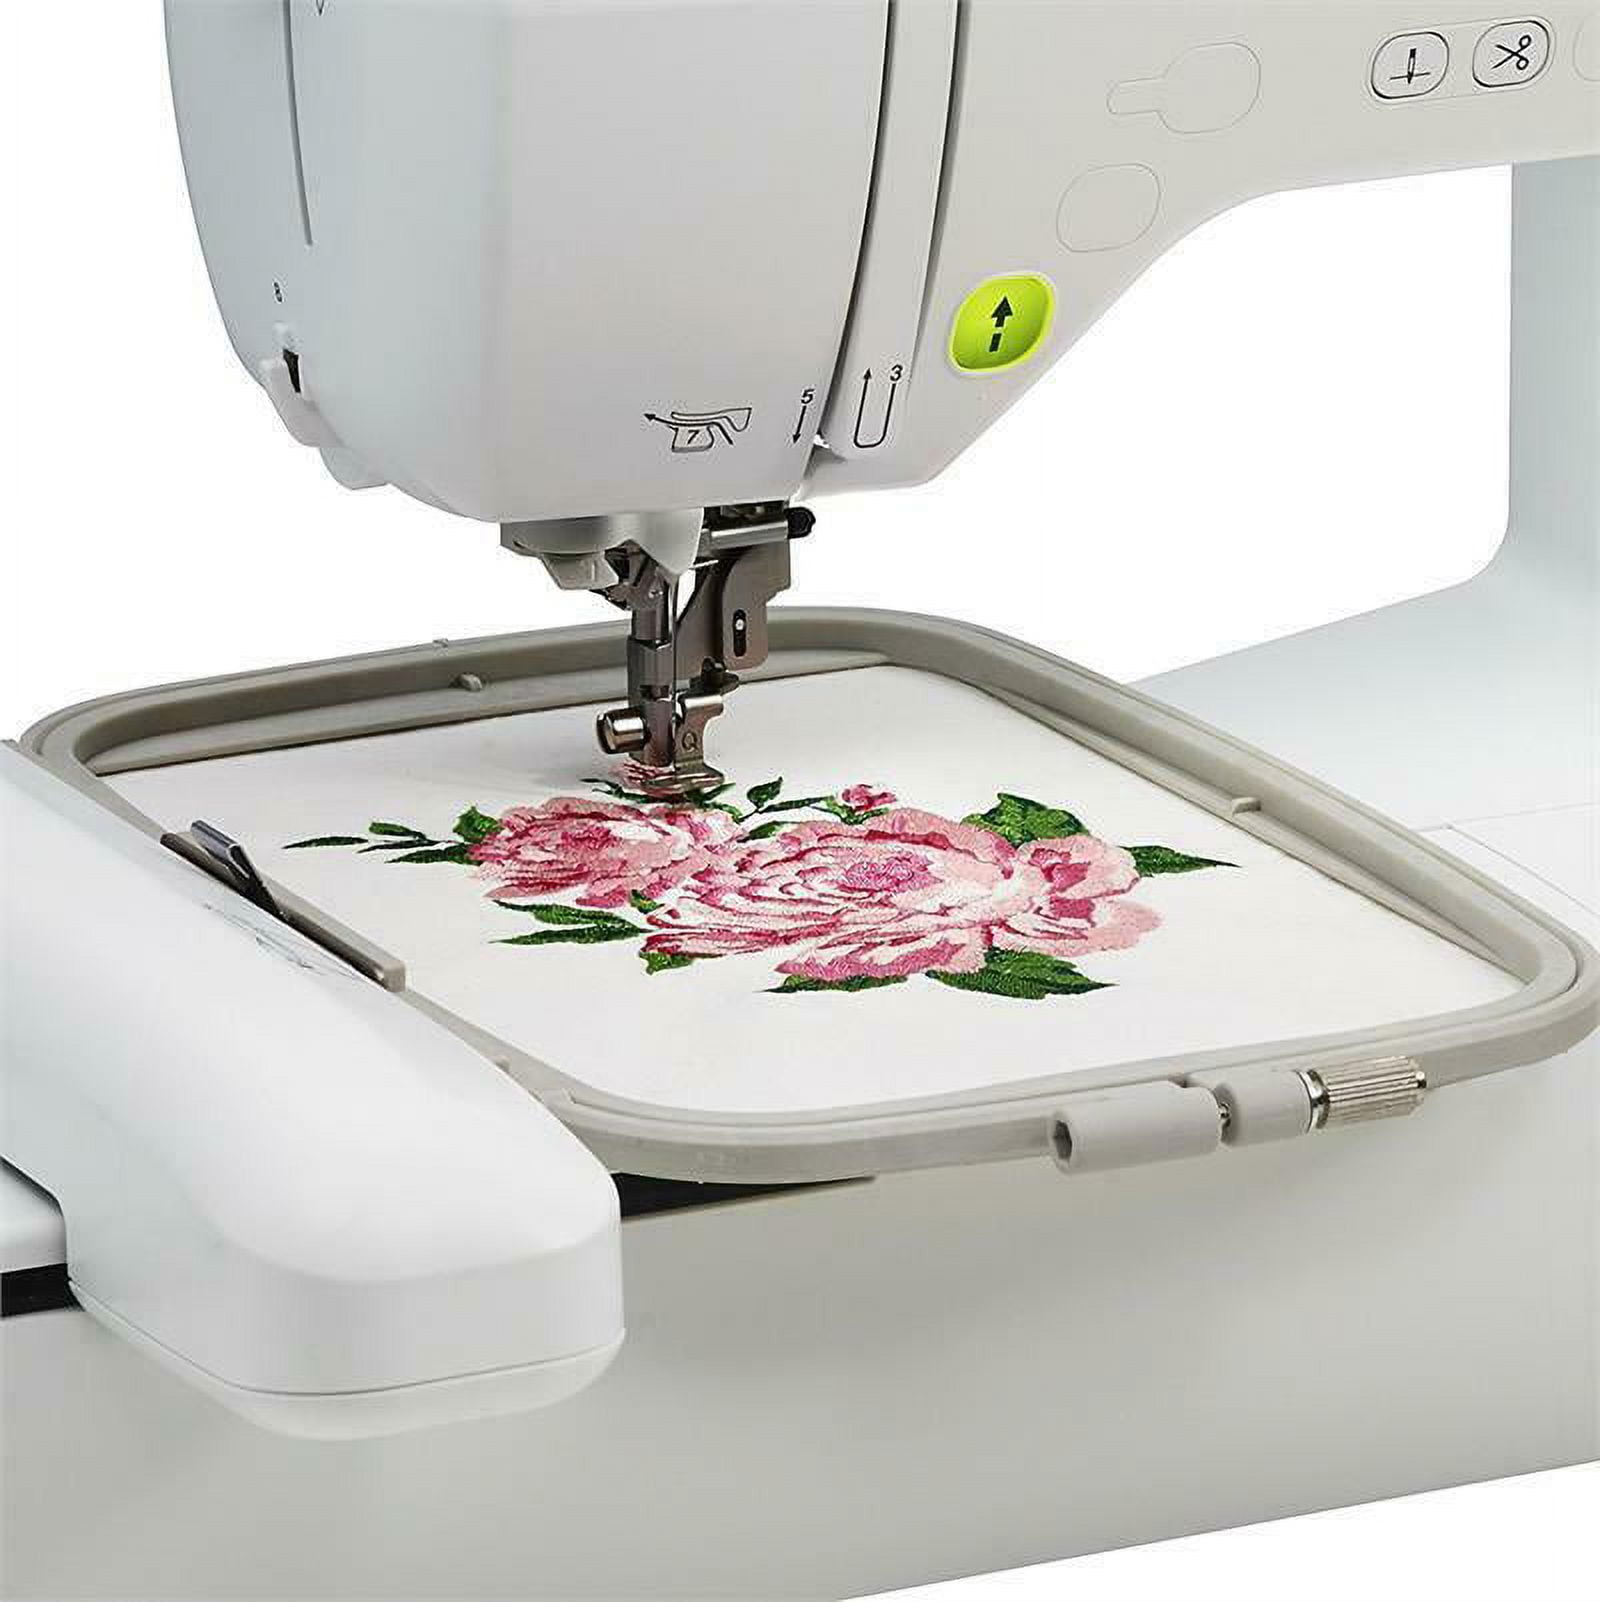 Buy Brother PE800 Embroidery Machine Online Brazil